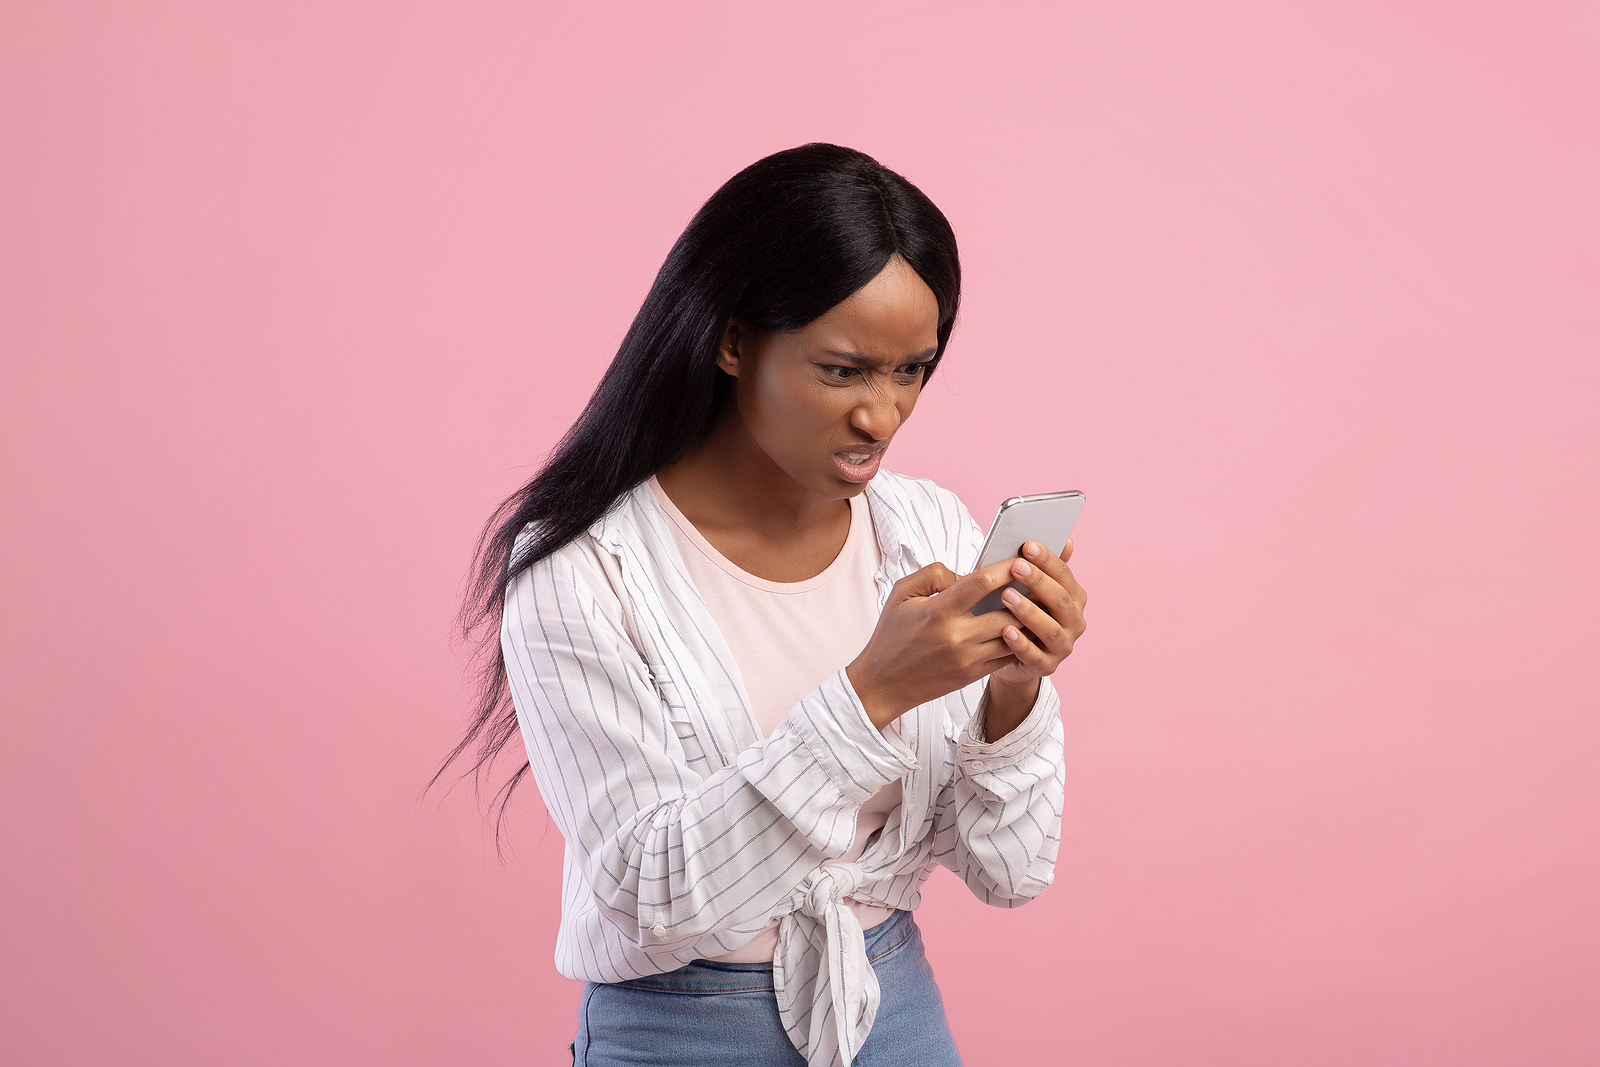 A woman looks frustrated at her phone against a plain background.